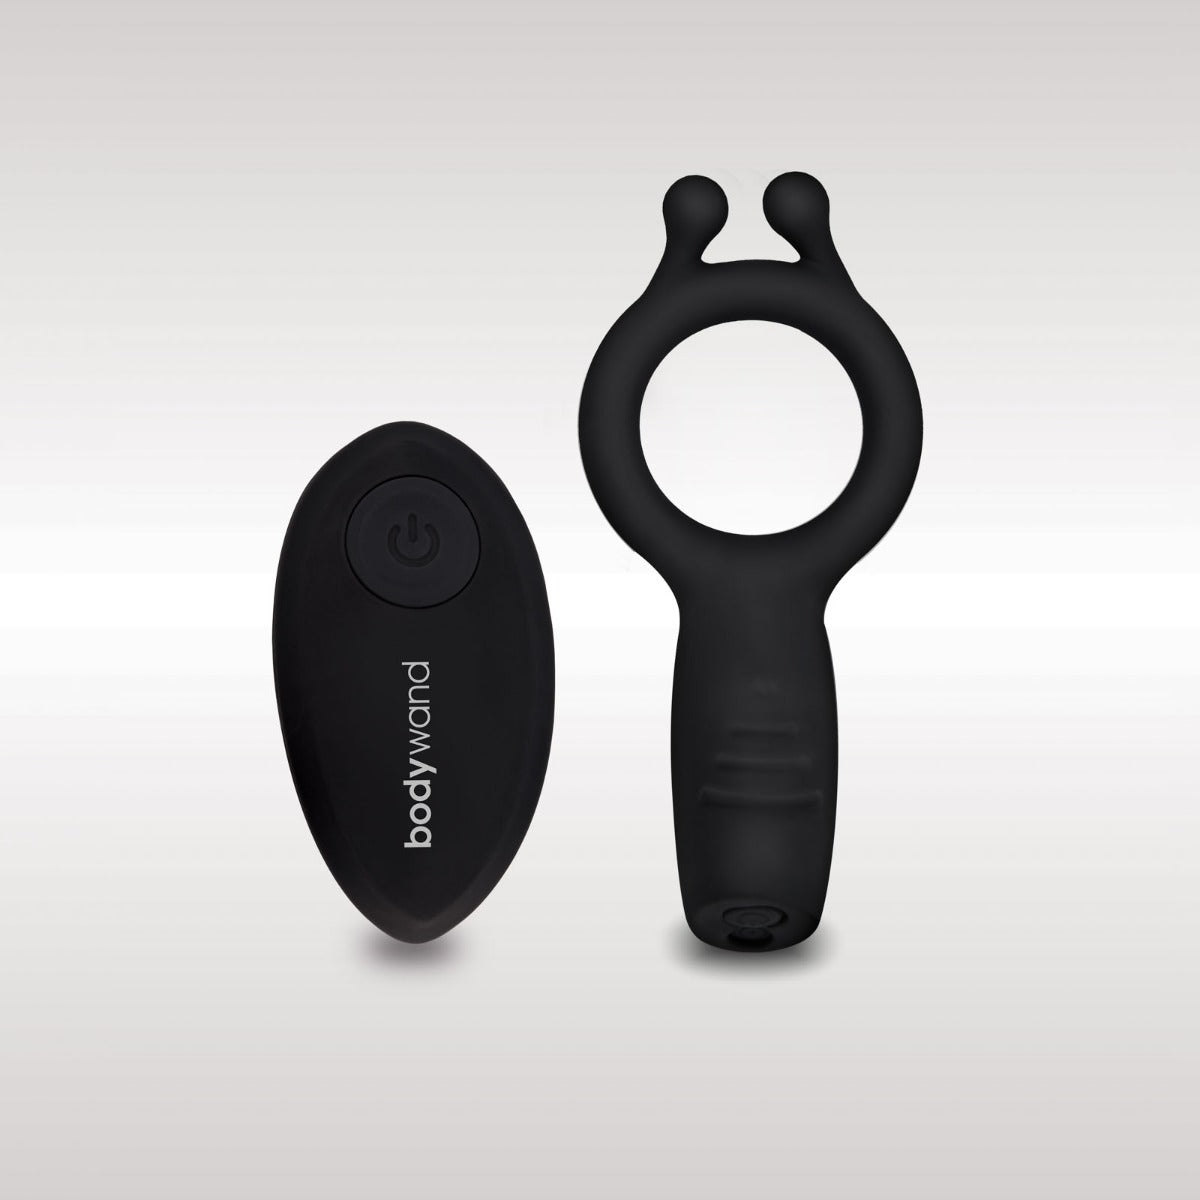 Vibrating Cock Rings Bodywand Date Night Vibrating Couples Ring With Remote - Black   